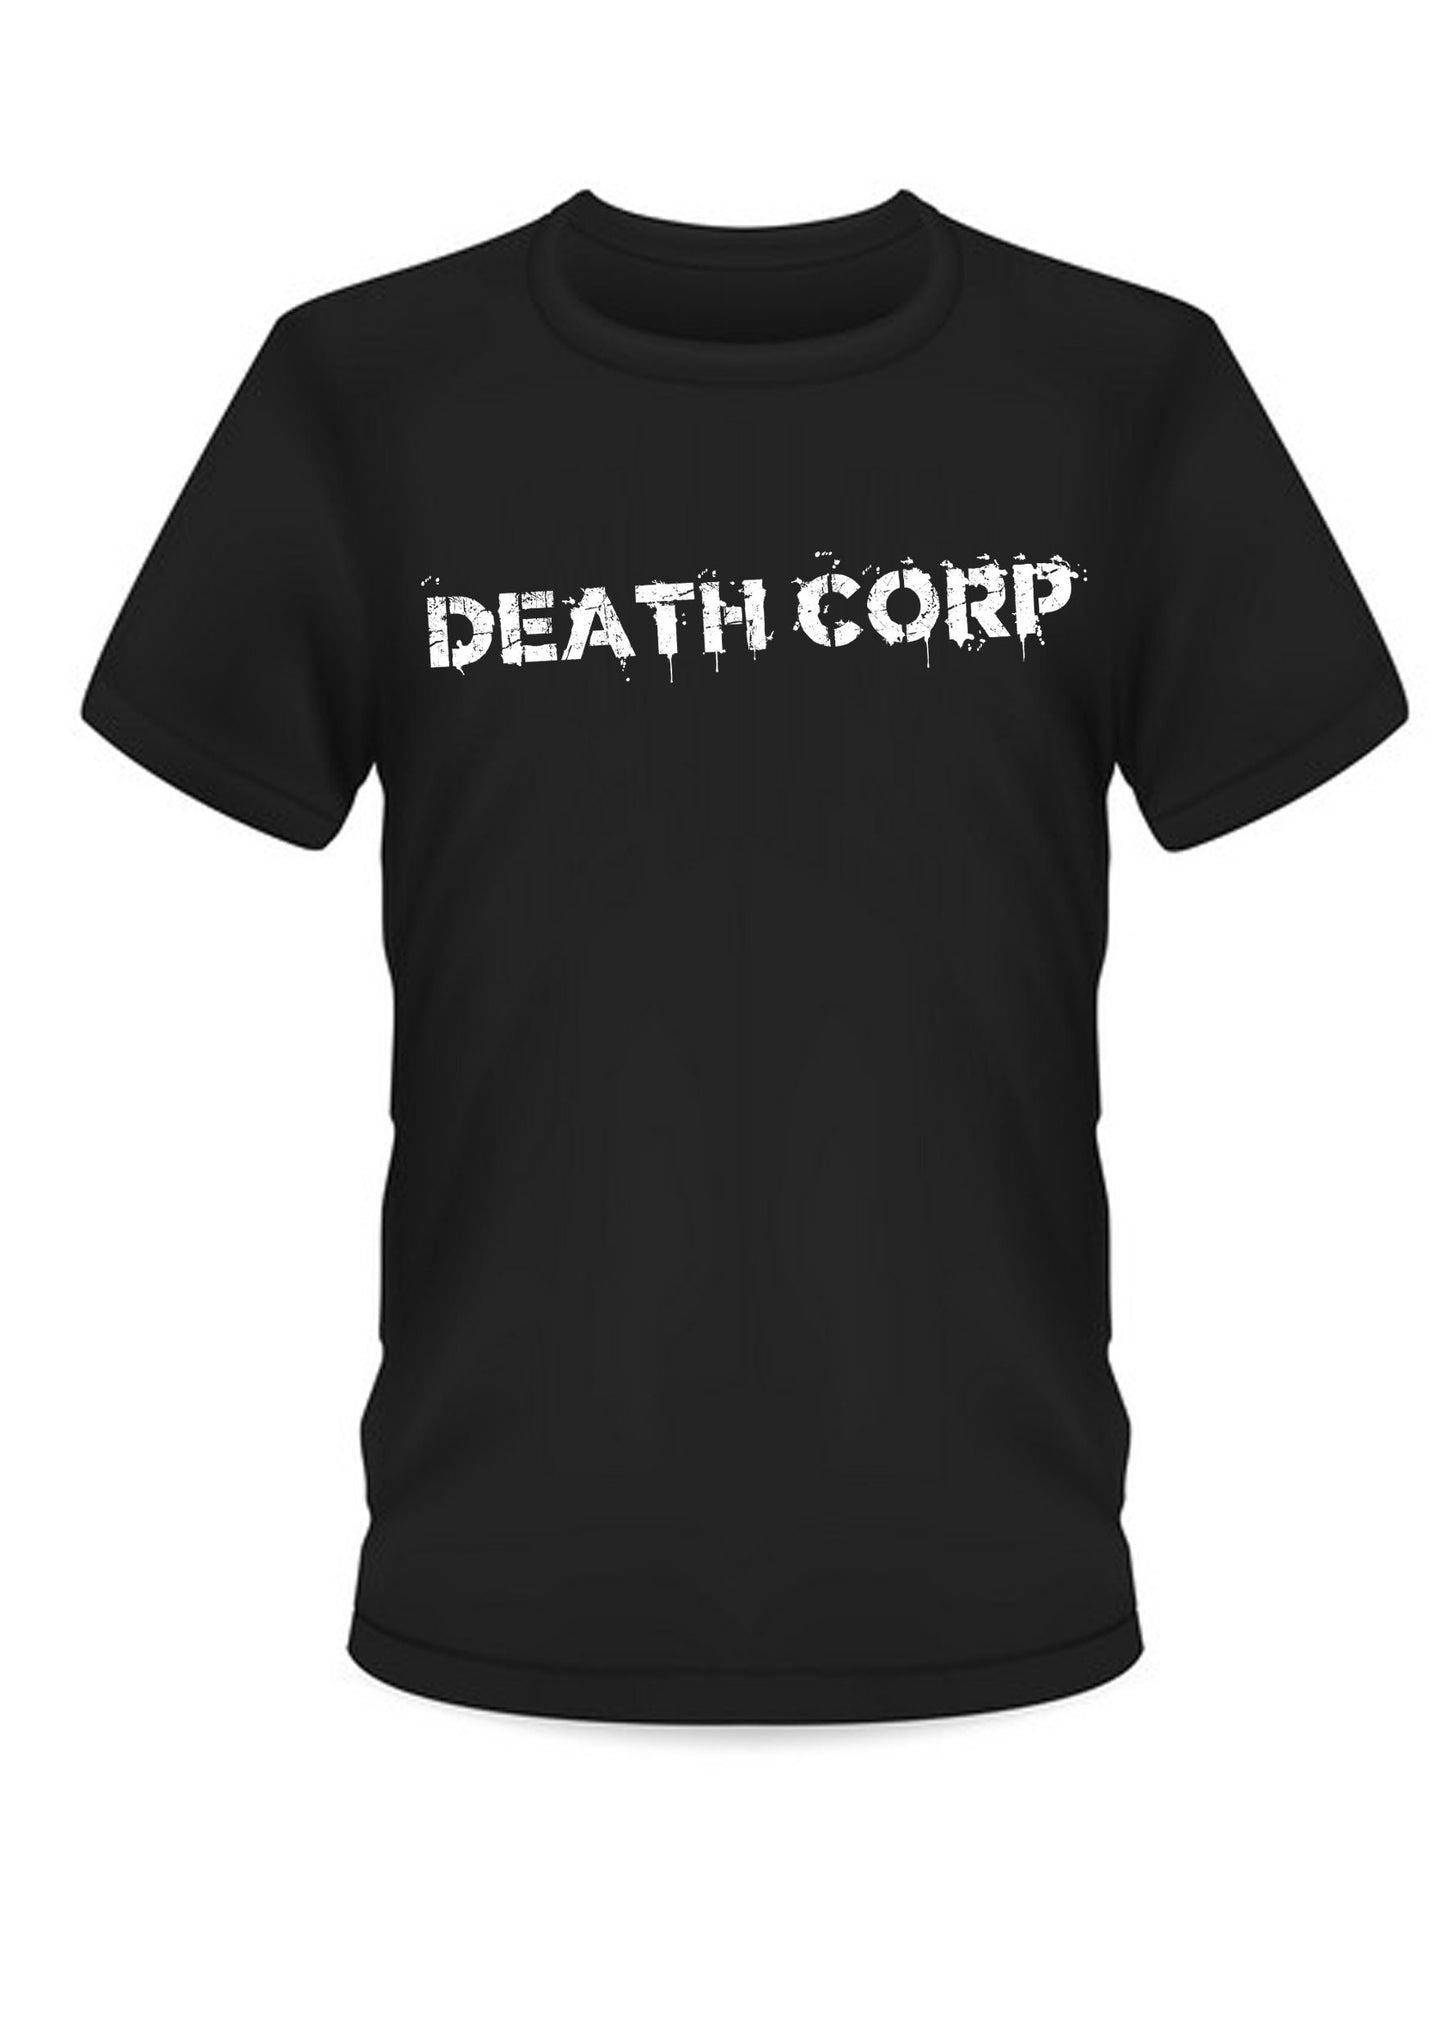 Death Corp - Classic T-shirt "in death we trust' (glow in the dark option)